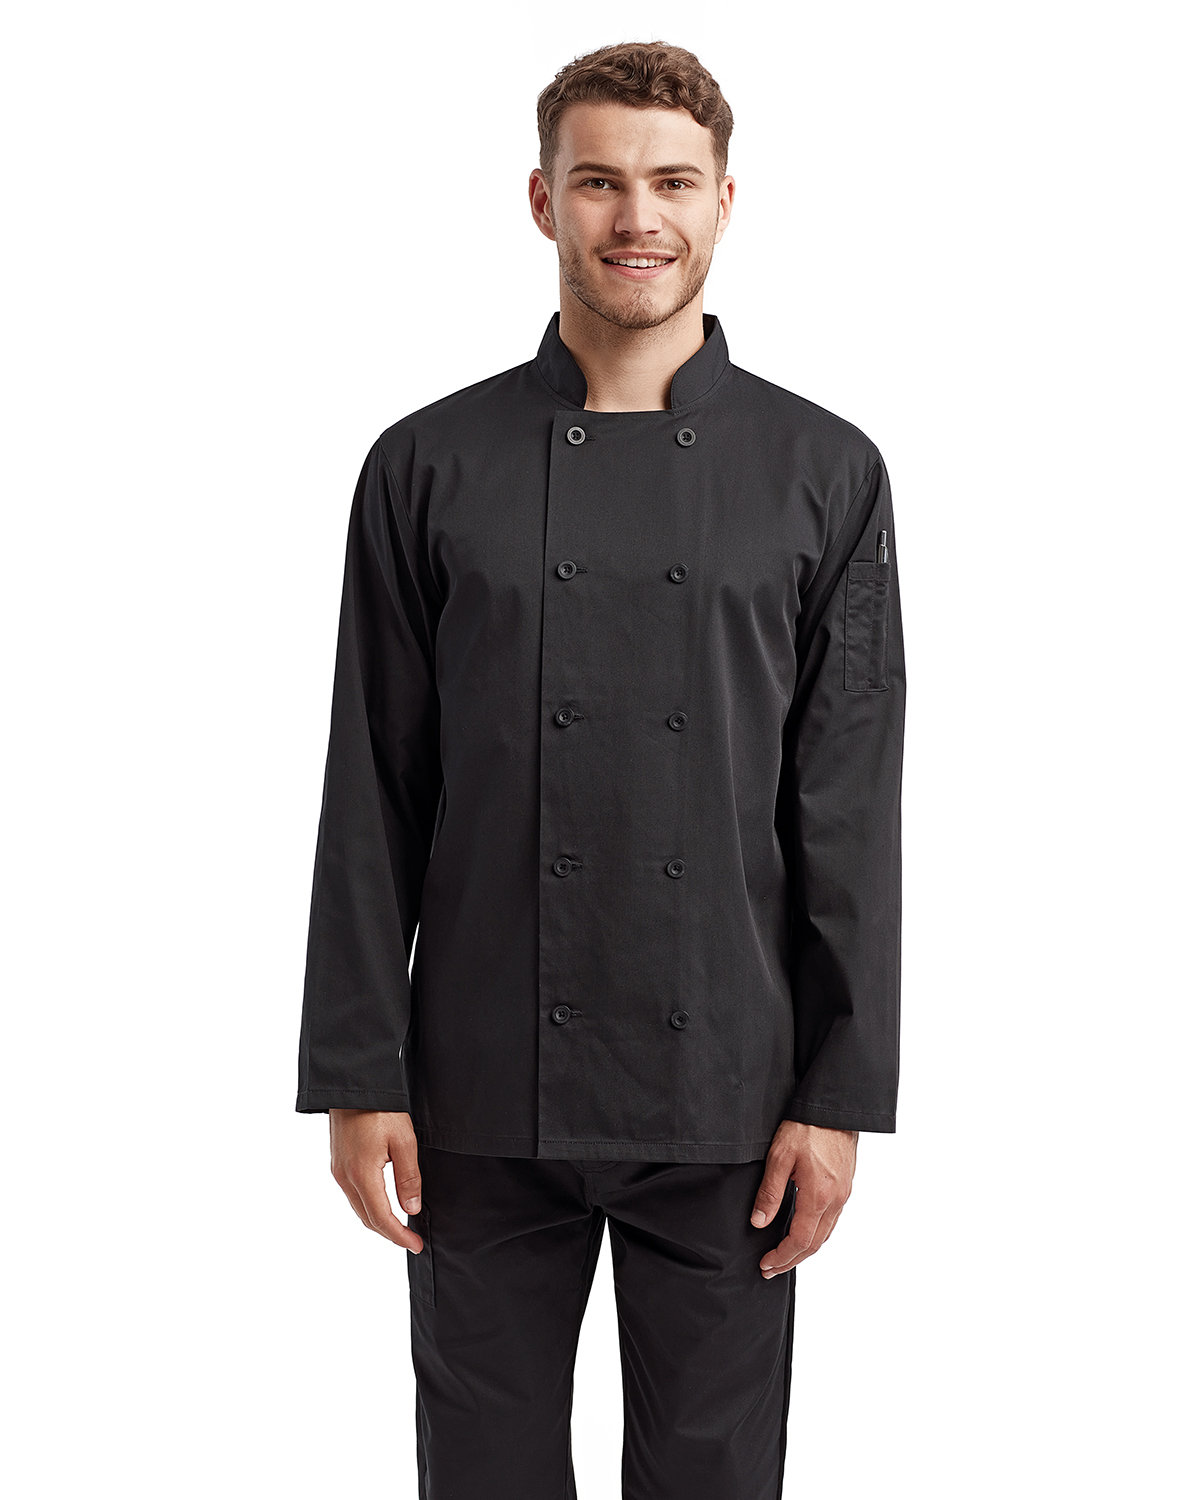 Artisan Collection by Reprime Unisex Long-Sleeve Sustainable Chef's Jacket BLACK 